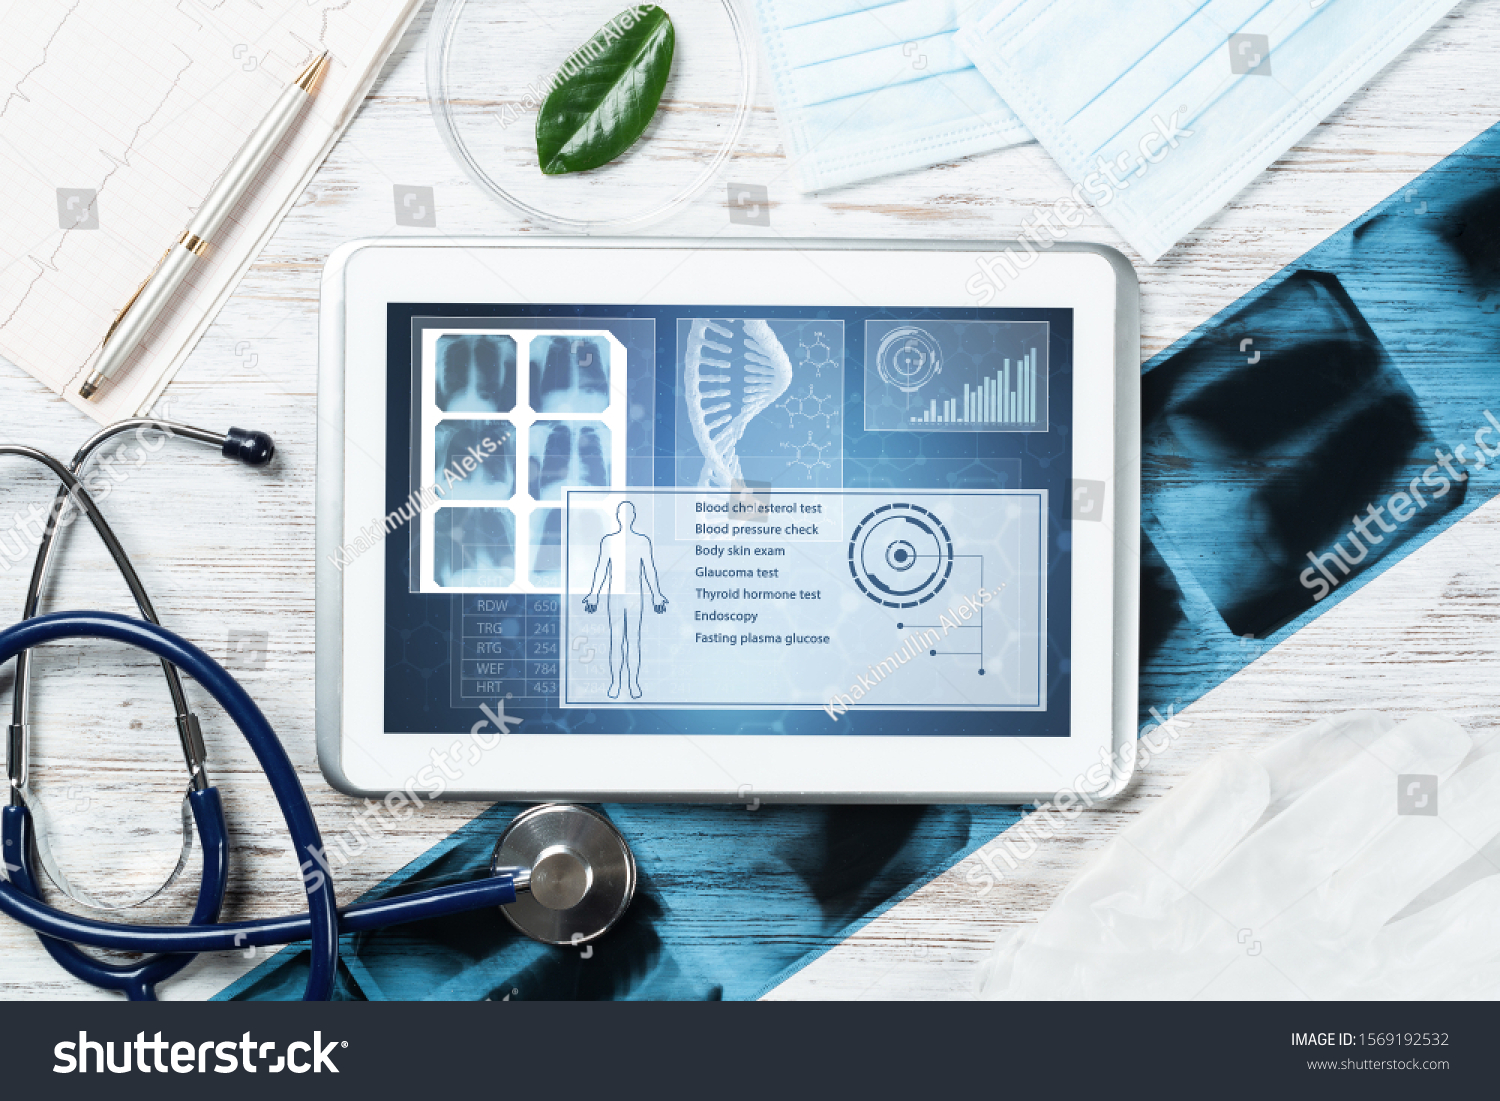 Human genetic research in medical laboratory. Tablet computer with DNA helix structure on screen. Stethoscope, x-ray image and cardiogram on wooden desk. Medical diagnostics and patient genome testing #1569192532